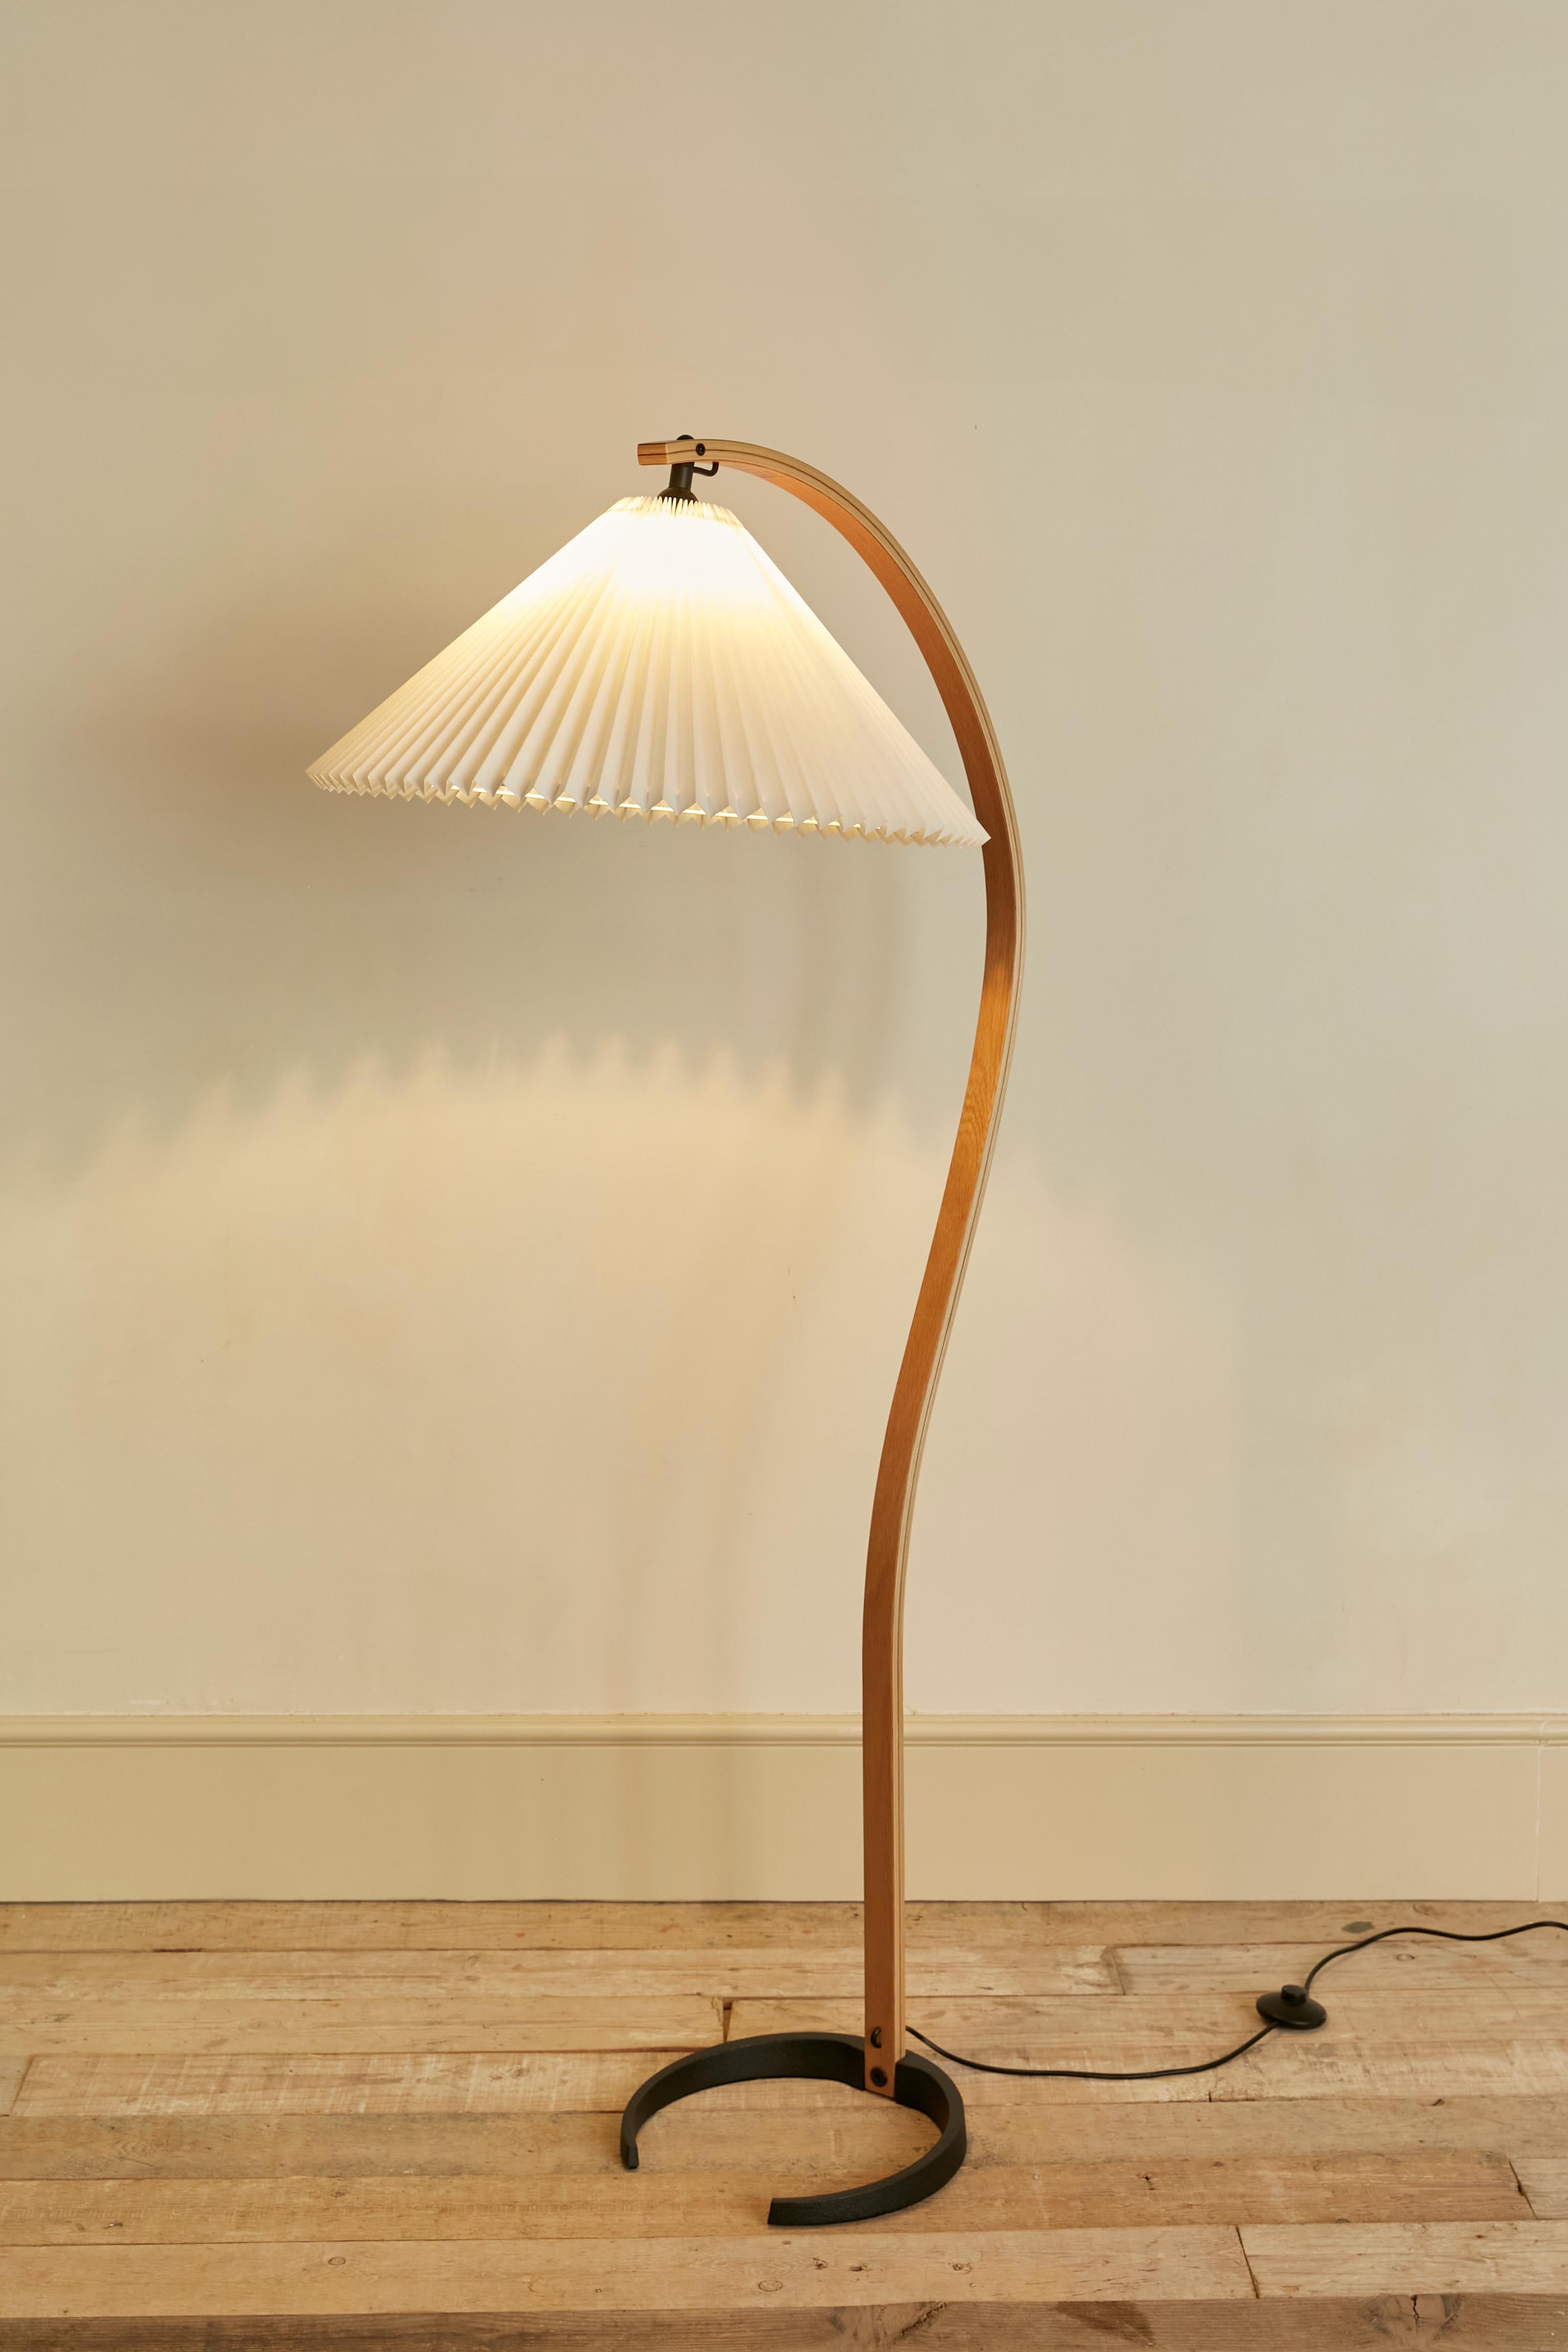 The Timberline floor lamp is a sculptural element. Designed in the 1970s by Mads Caprani, it quickly became an international reference. The thoughtful design, such as the inset lanyard and adjustable steering screen, show Caprani's attention to